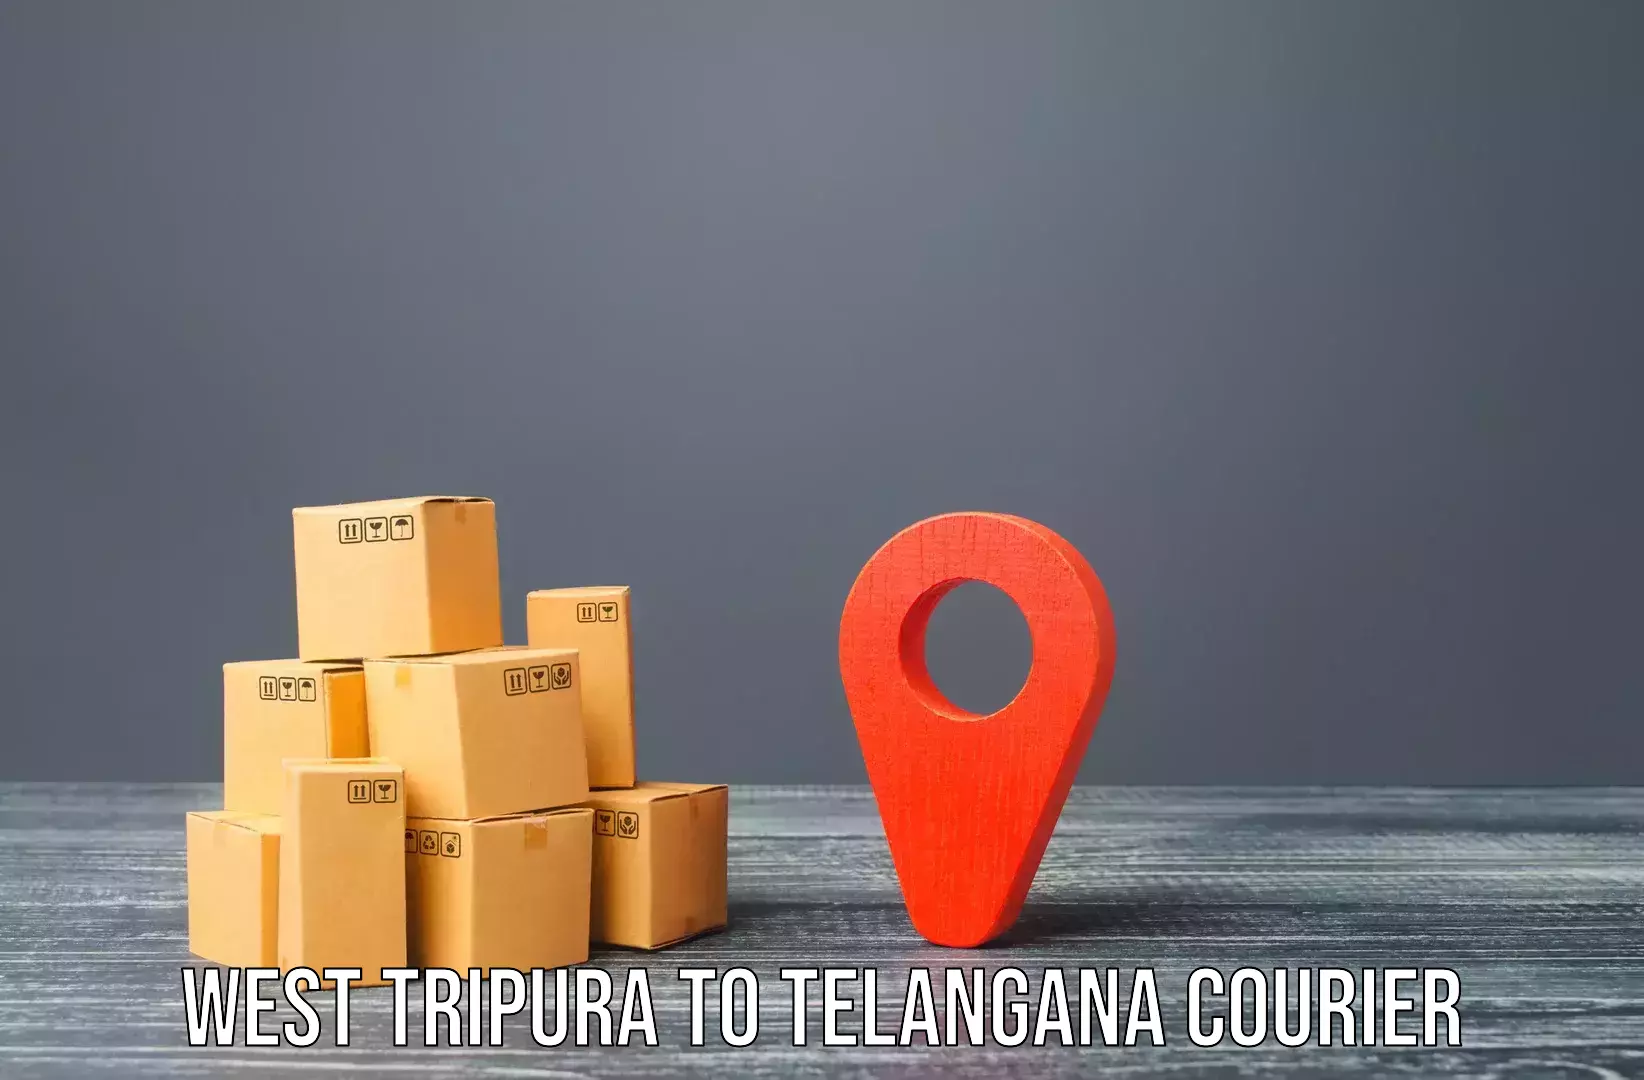 Moving and packing experts West Tripura to Secunderabad